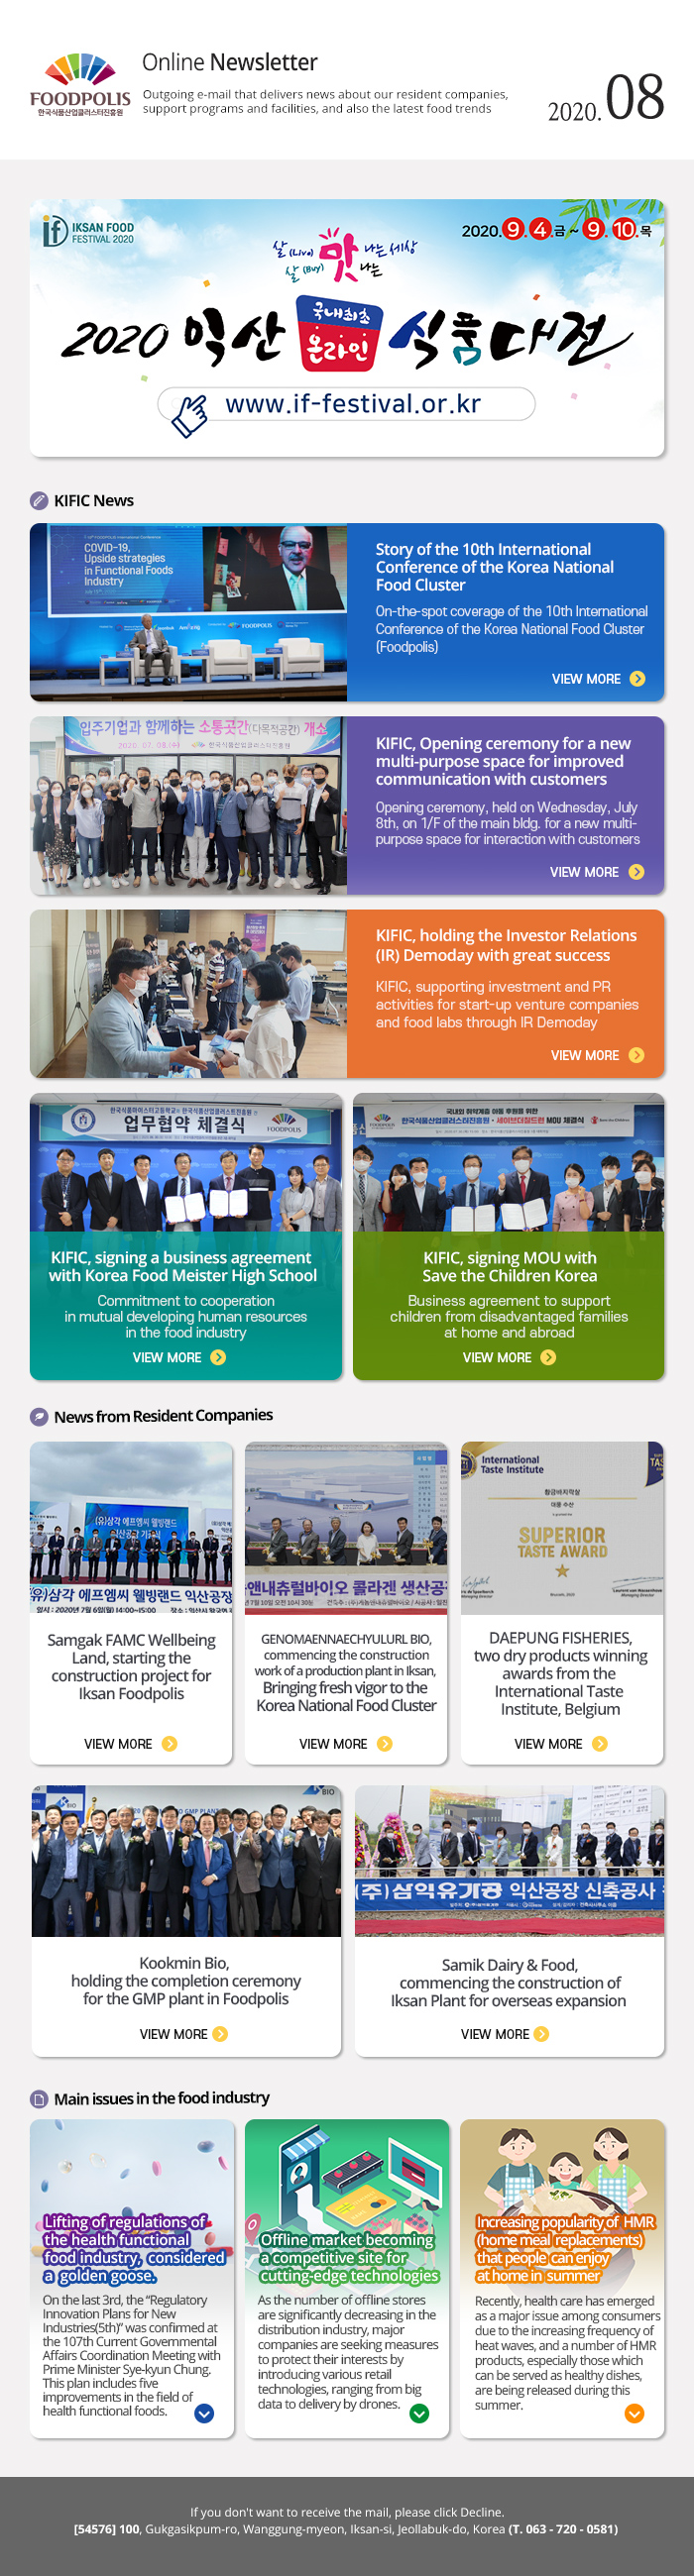 FOODPOLIS 한국식품산업클러스터진흥원. Online Newsletter. Outgoing e-mail that delivers news about our resident companies, support programs and facilities, and also the latest food trends 2020. 08